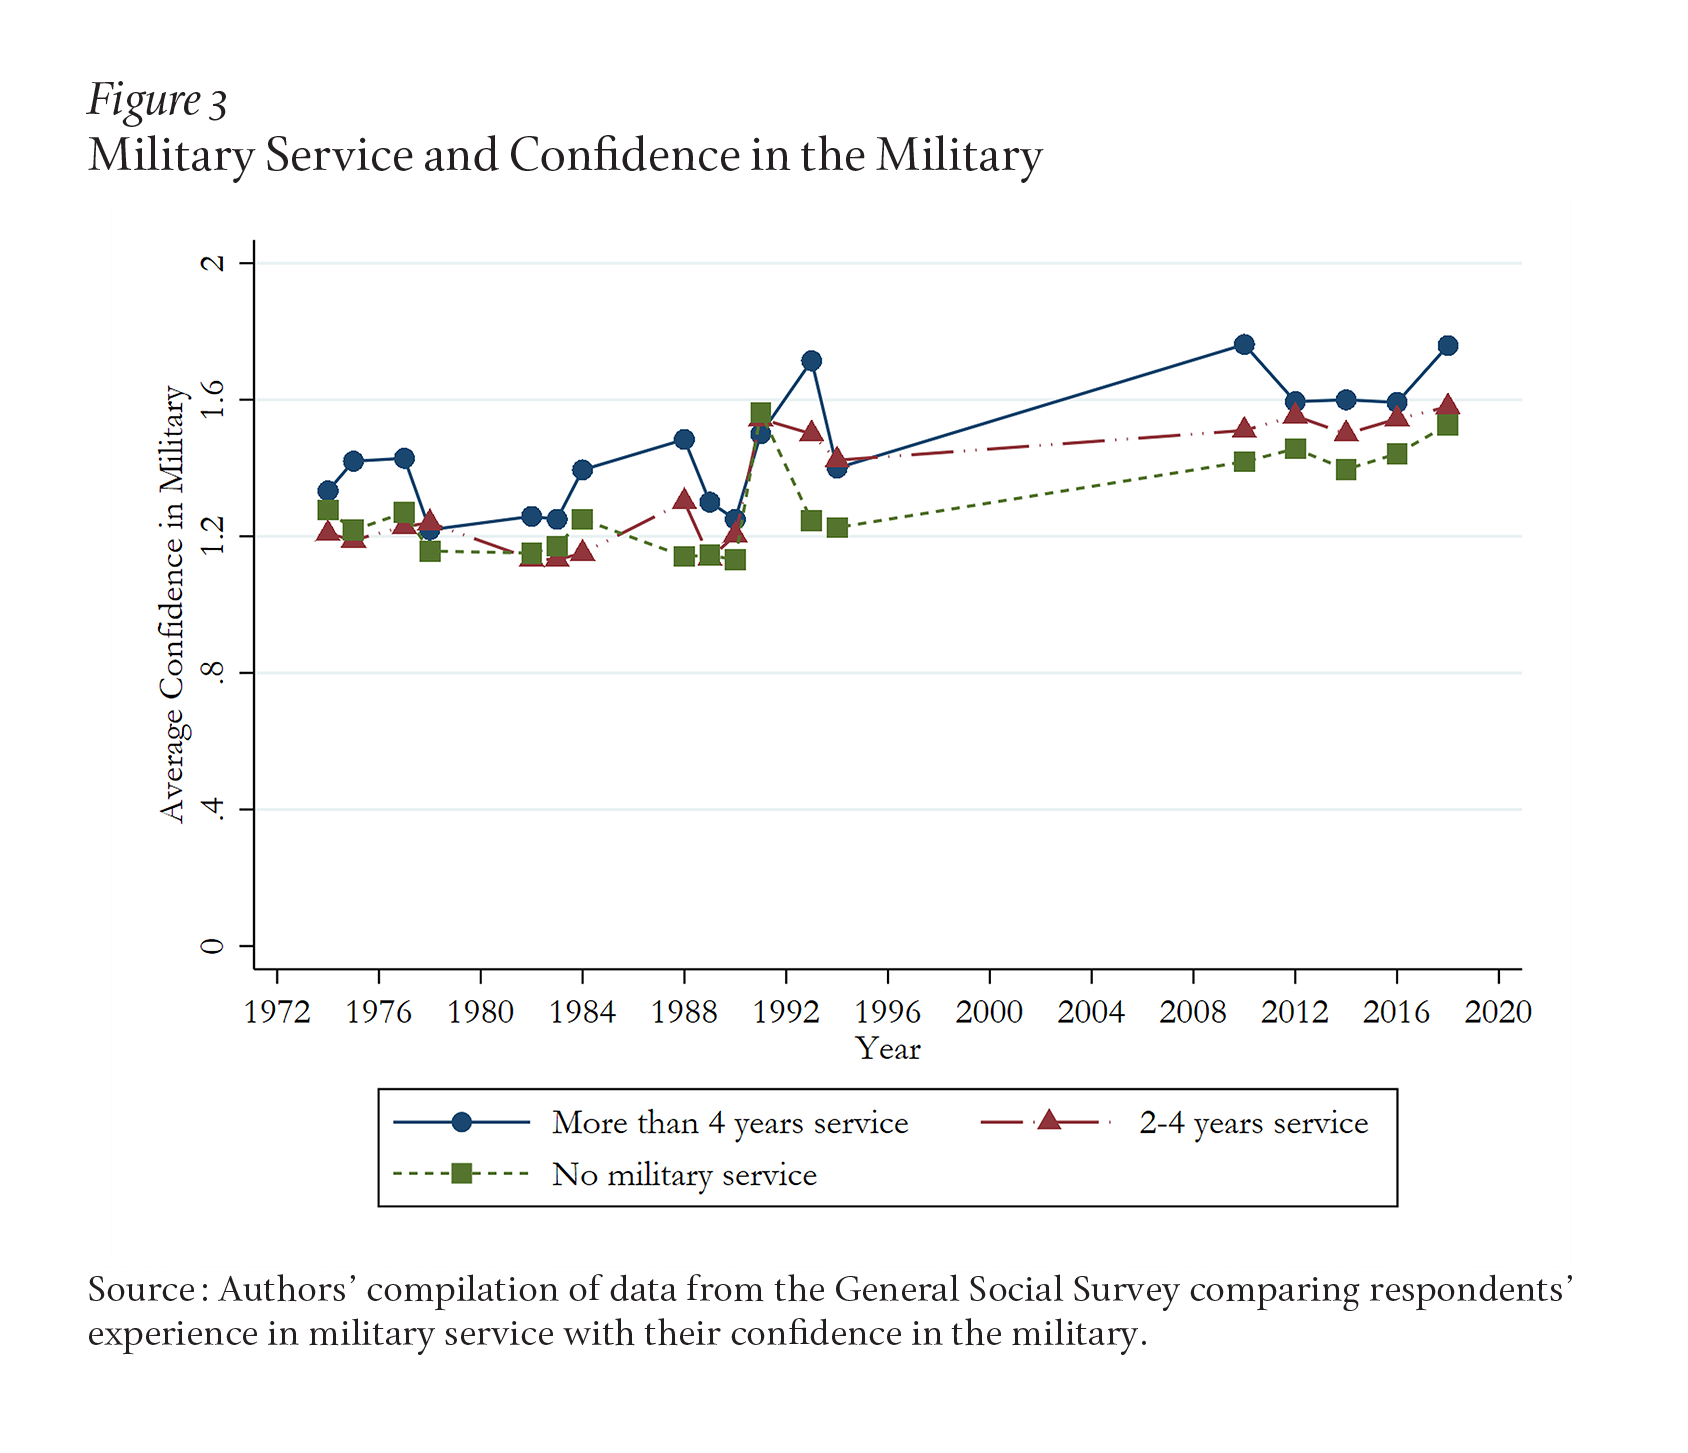 Figure 3 shows that mean warmth toward the military was roughly five points higher for respondents with military service than for those without in 2004, 2008, and 2012.